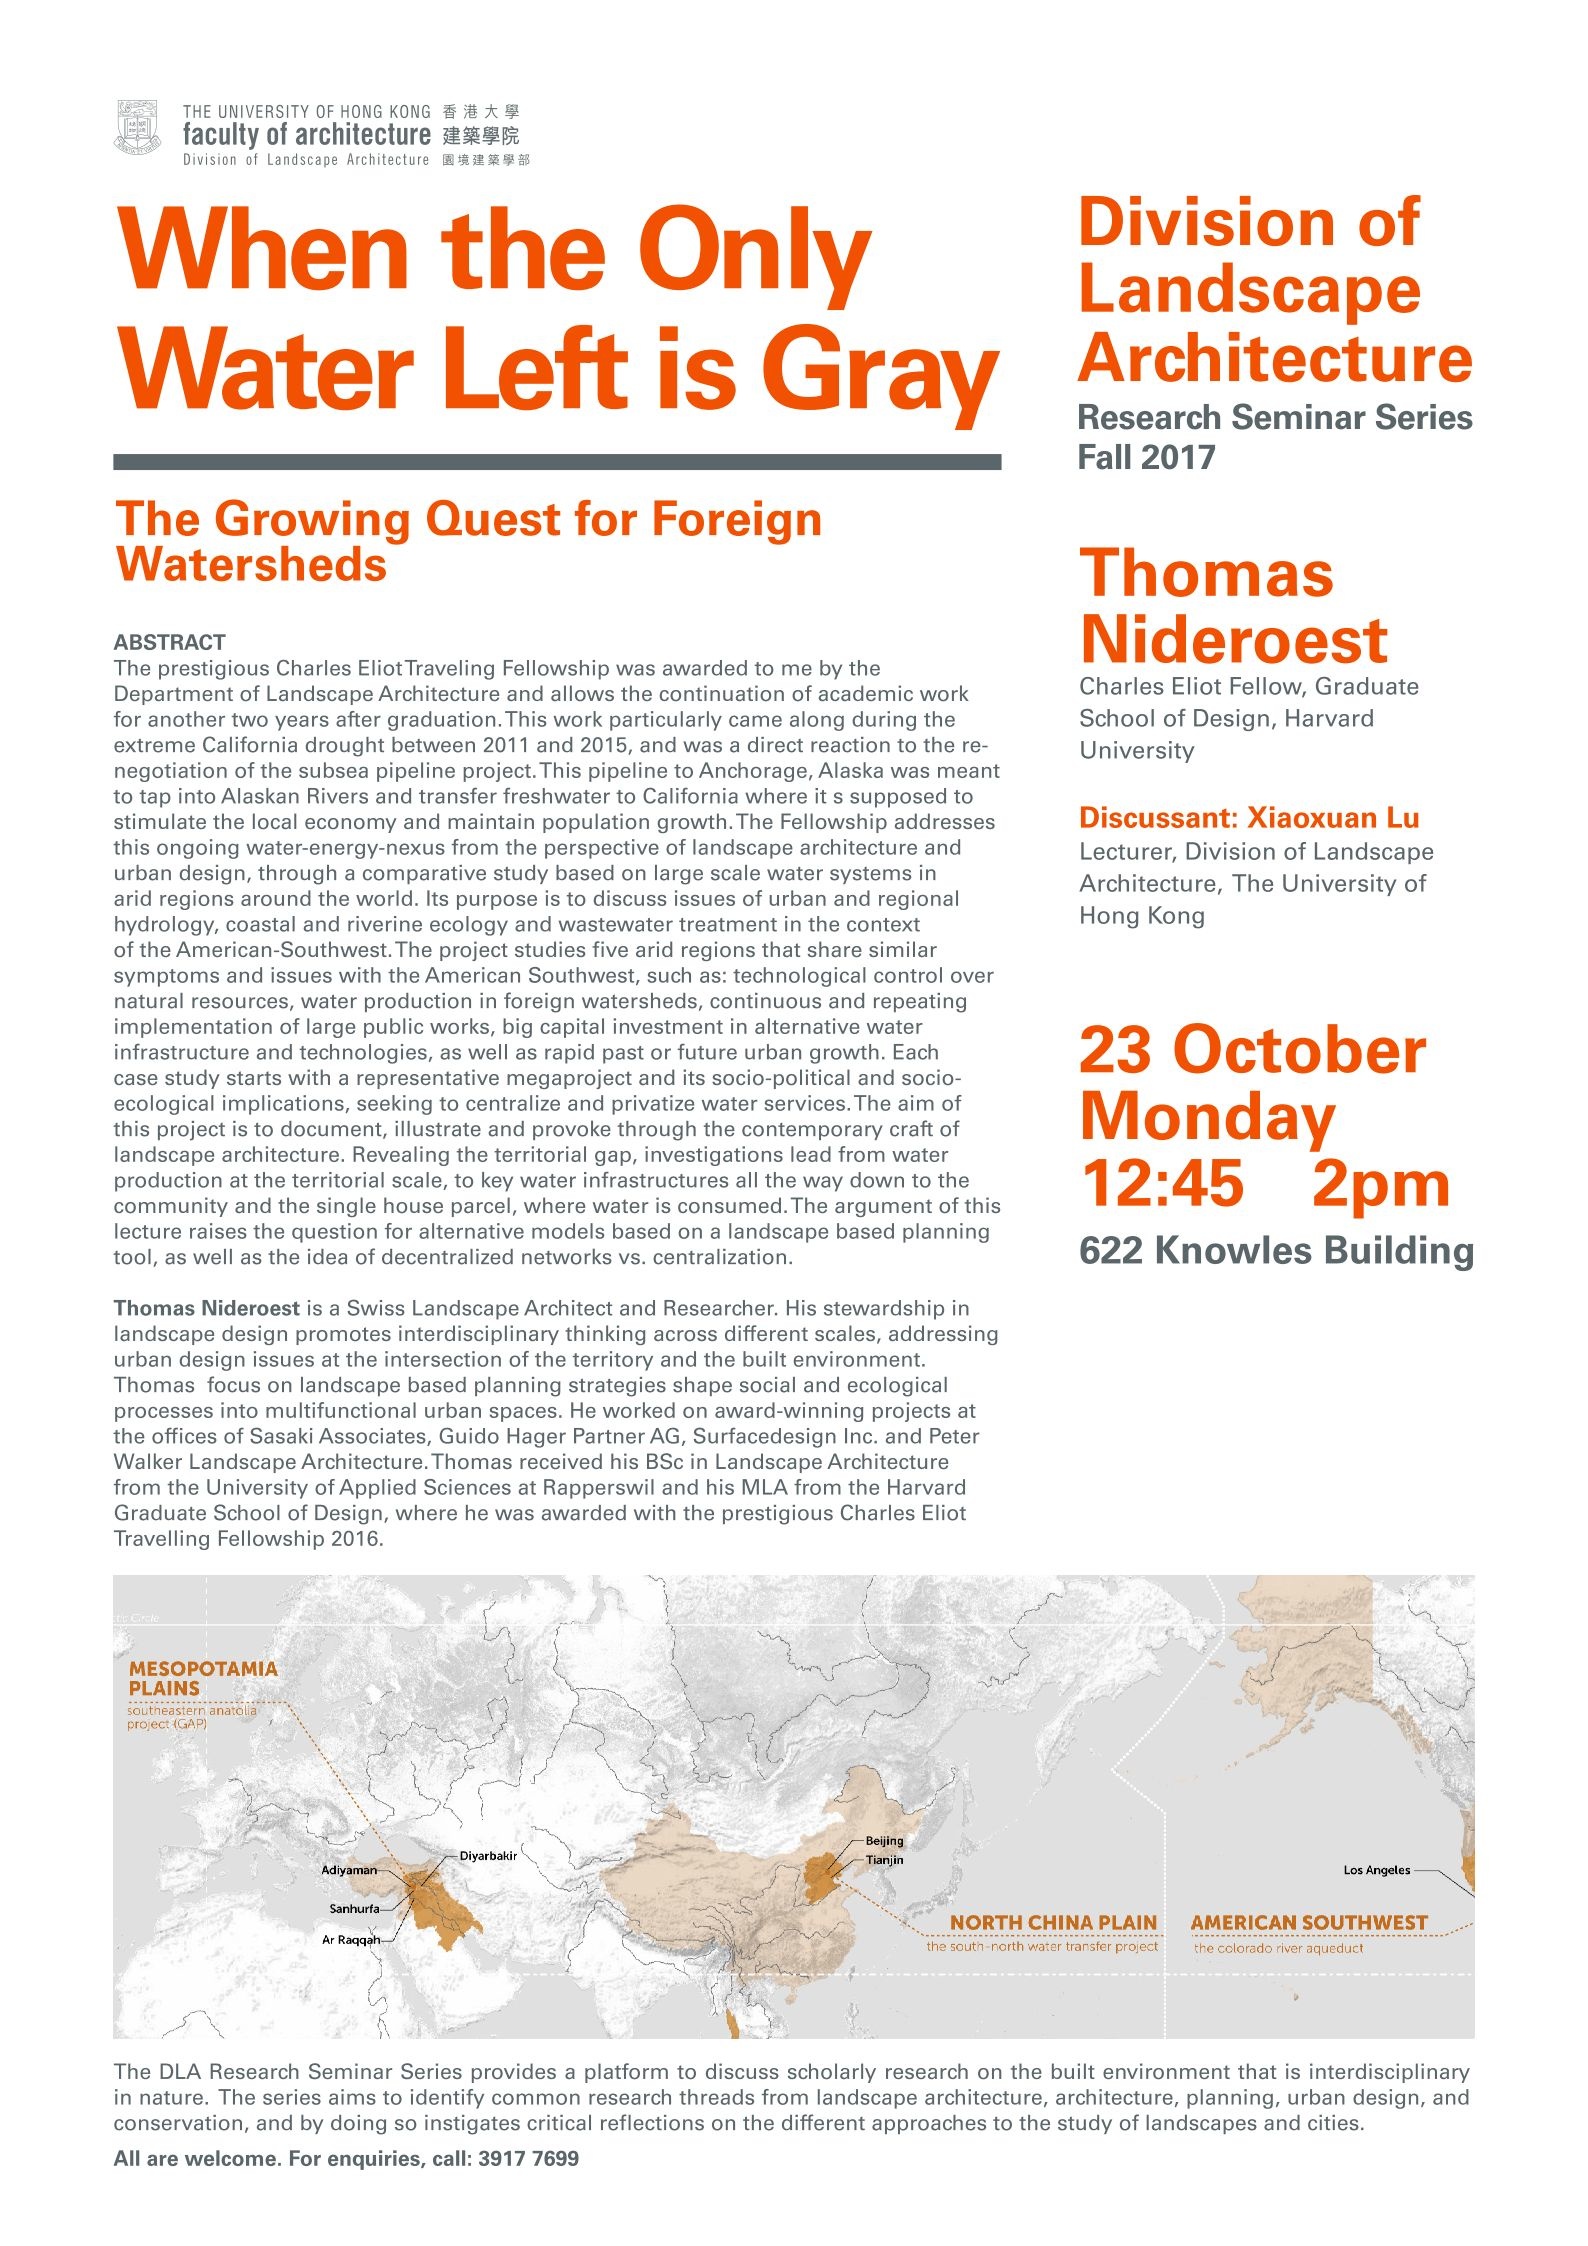 DLA Research Seminar: When the Only Water Left is Gray - The Growing Quest for Foreign Watersheds